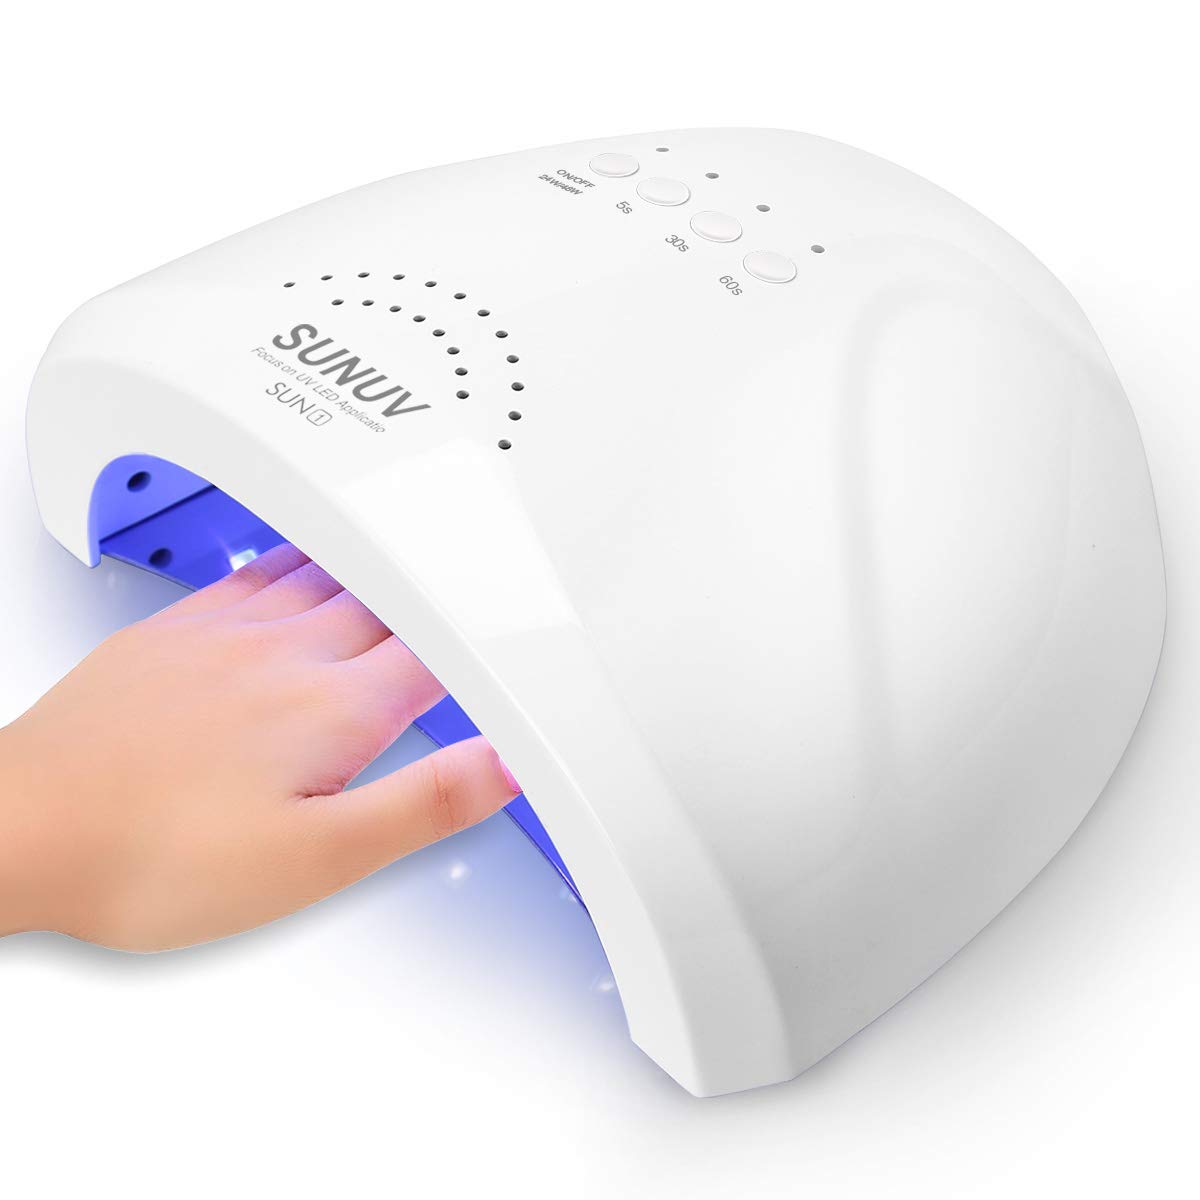 Are uv nail dryers safe during pregnancy